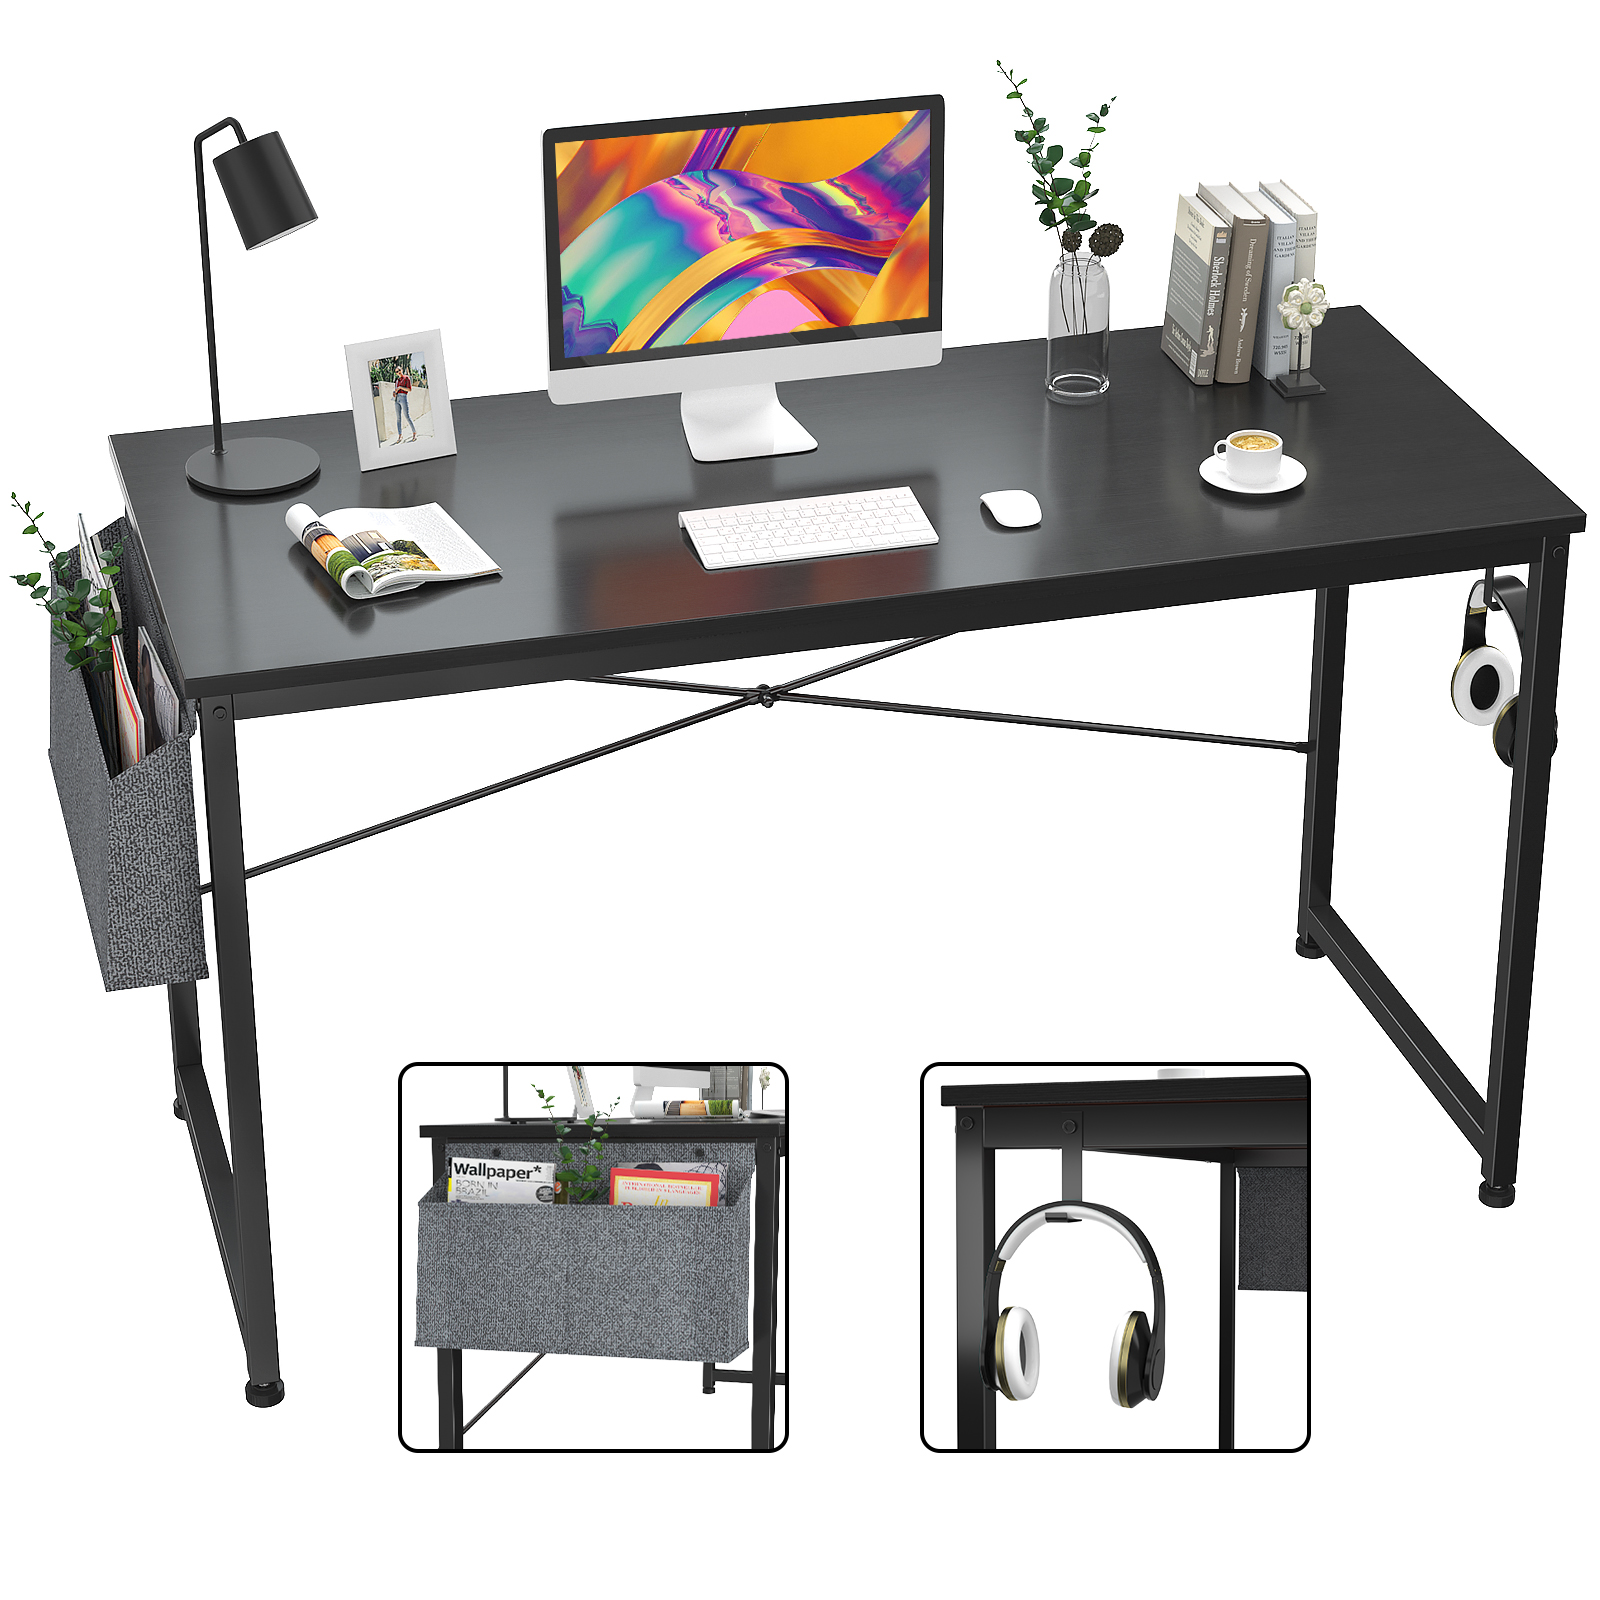 Computer Desk 47 inch Home Office Writing Study Desk, Modern Simple Style Laptop Table with Storage Bag,Black-Boyel Living